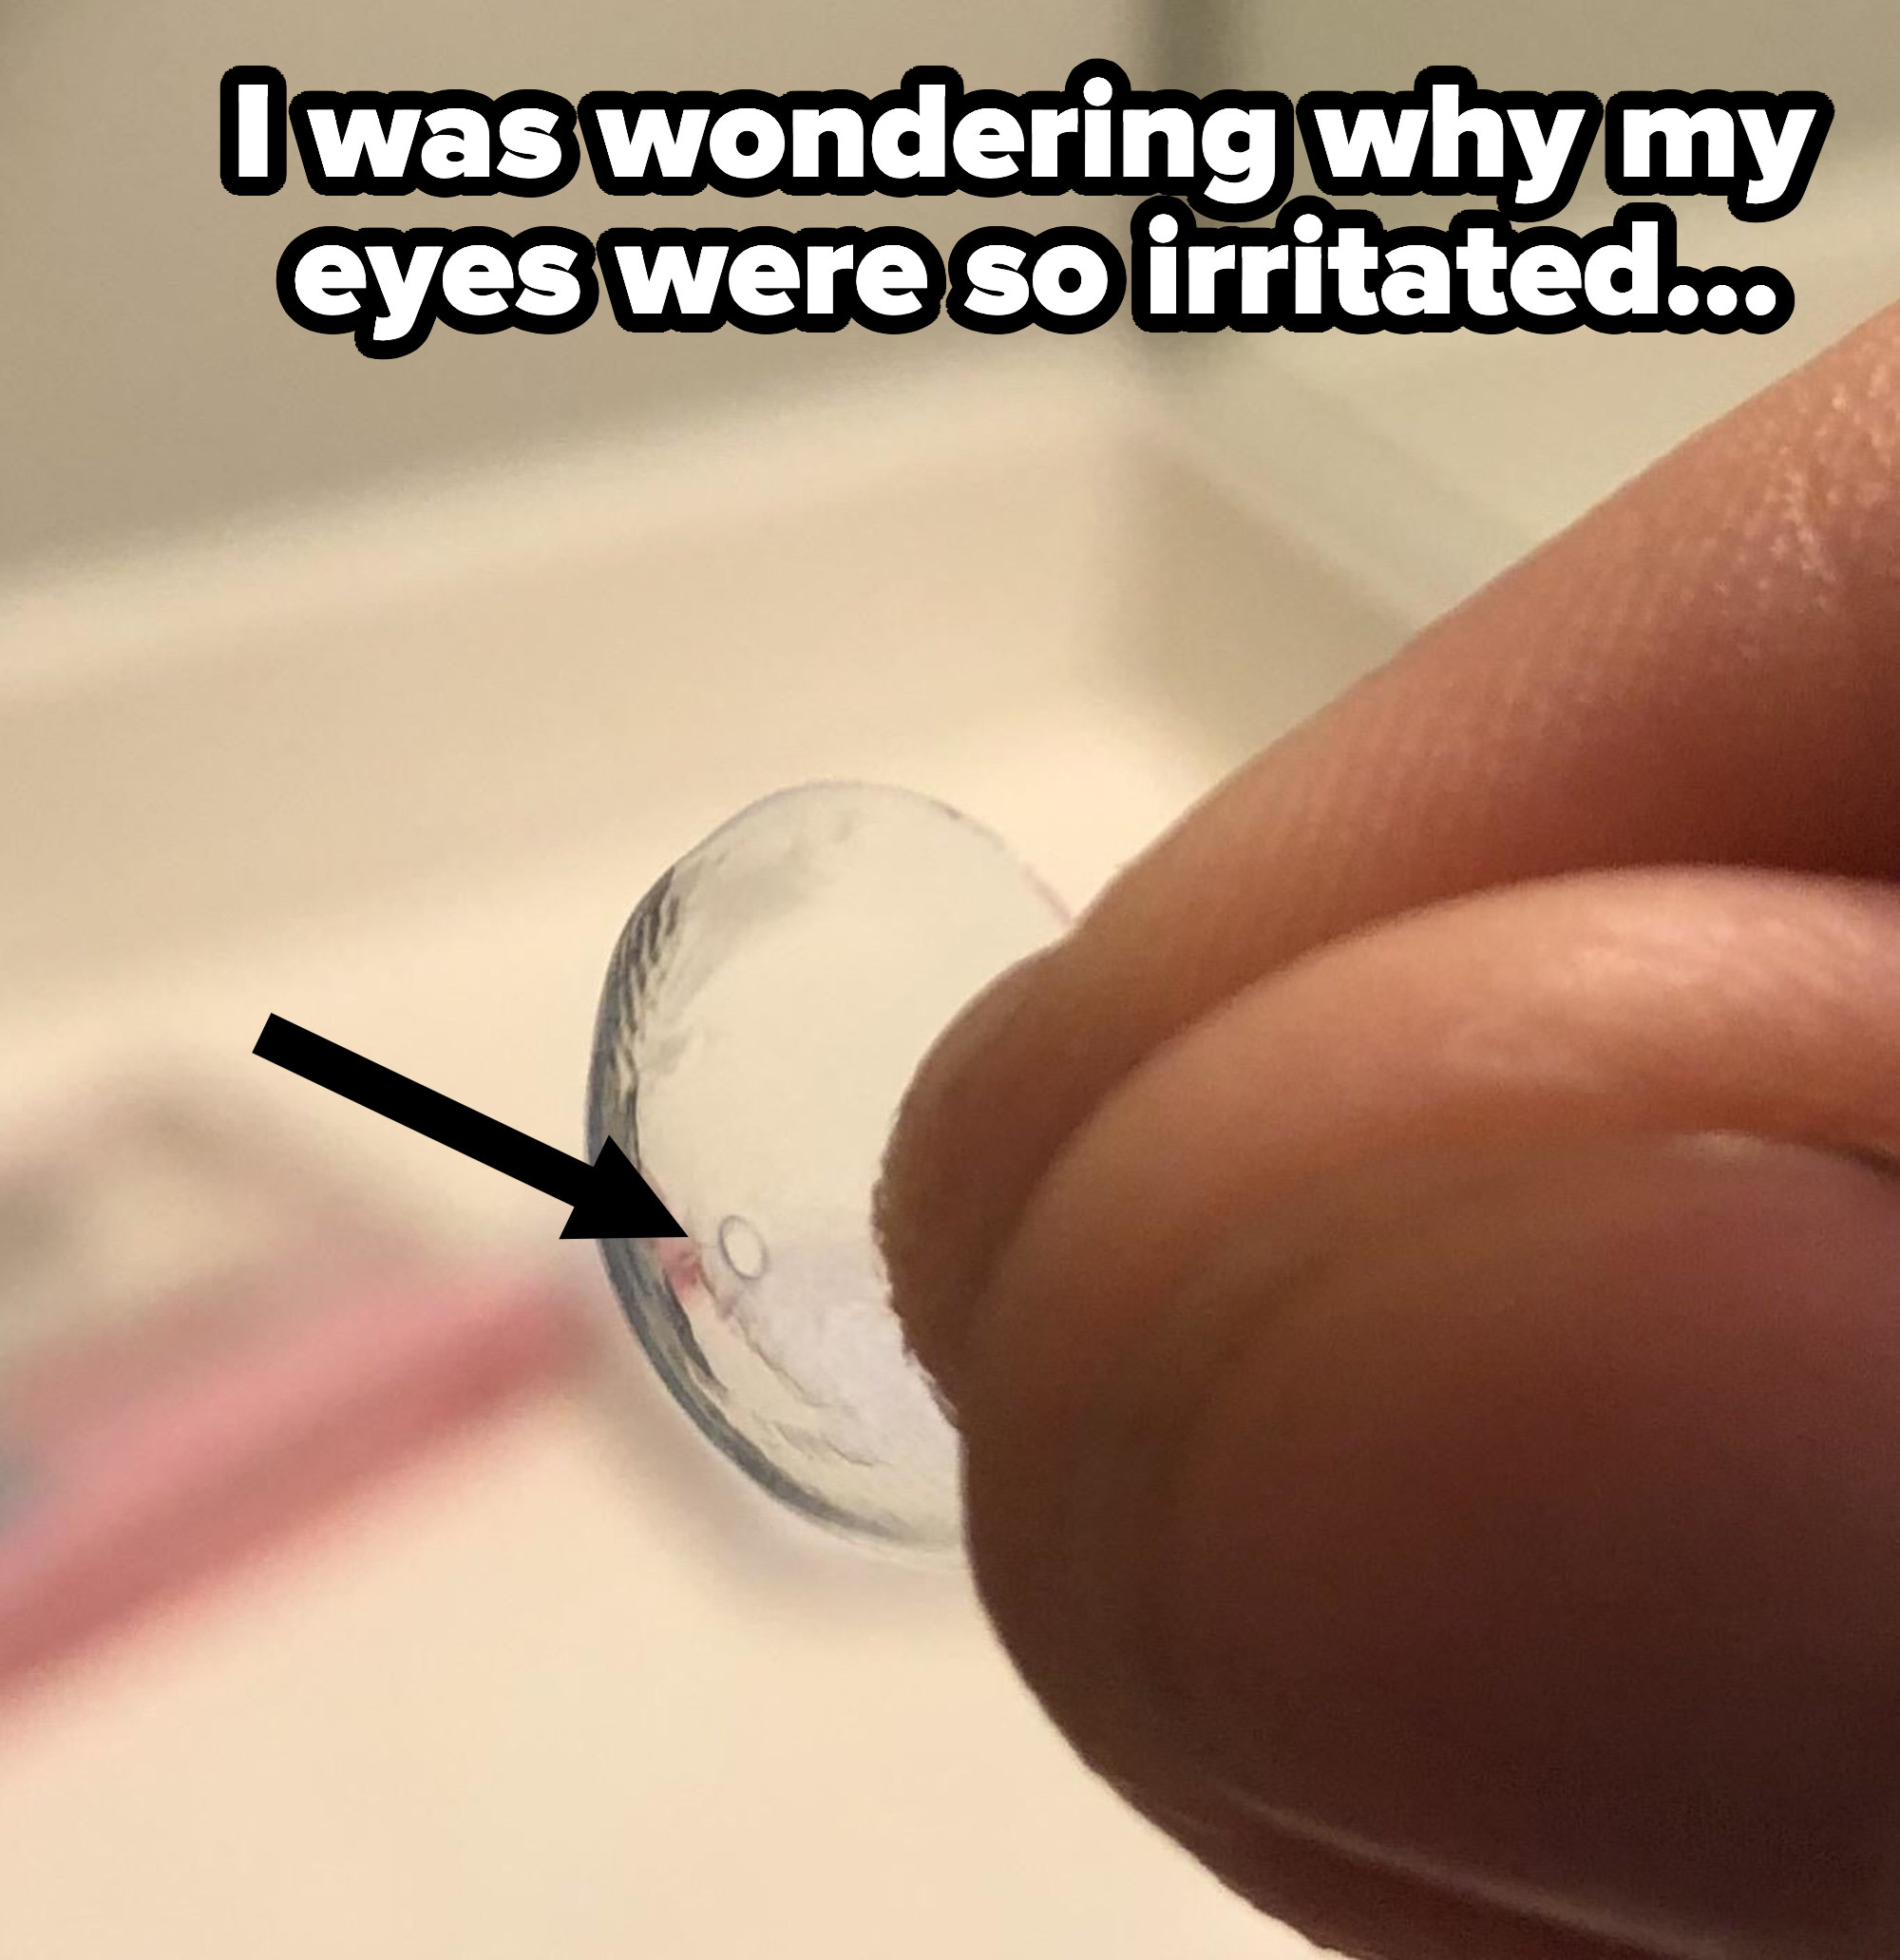 A dirty contact lens